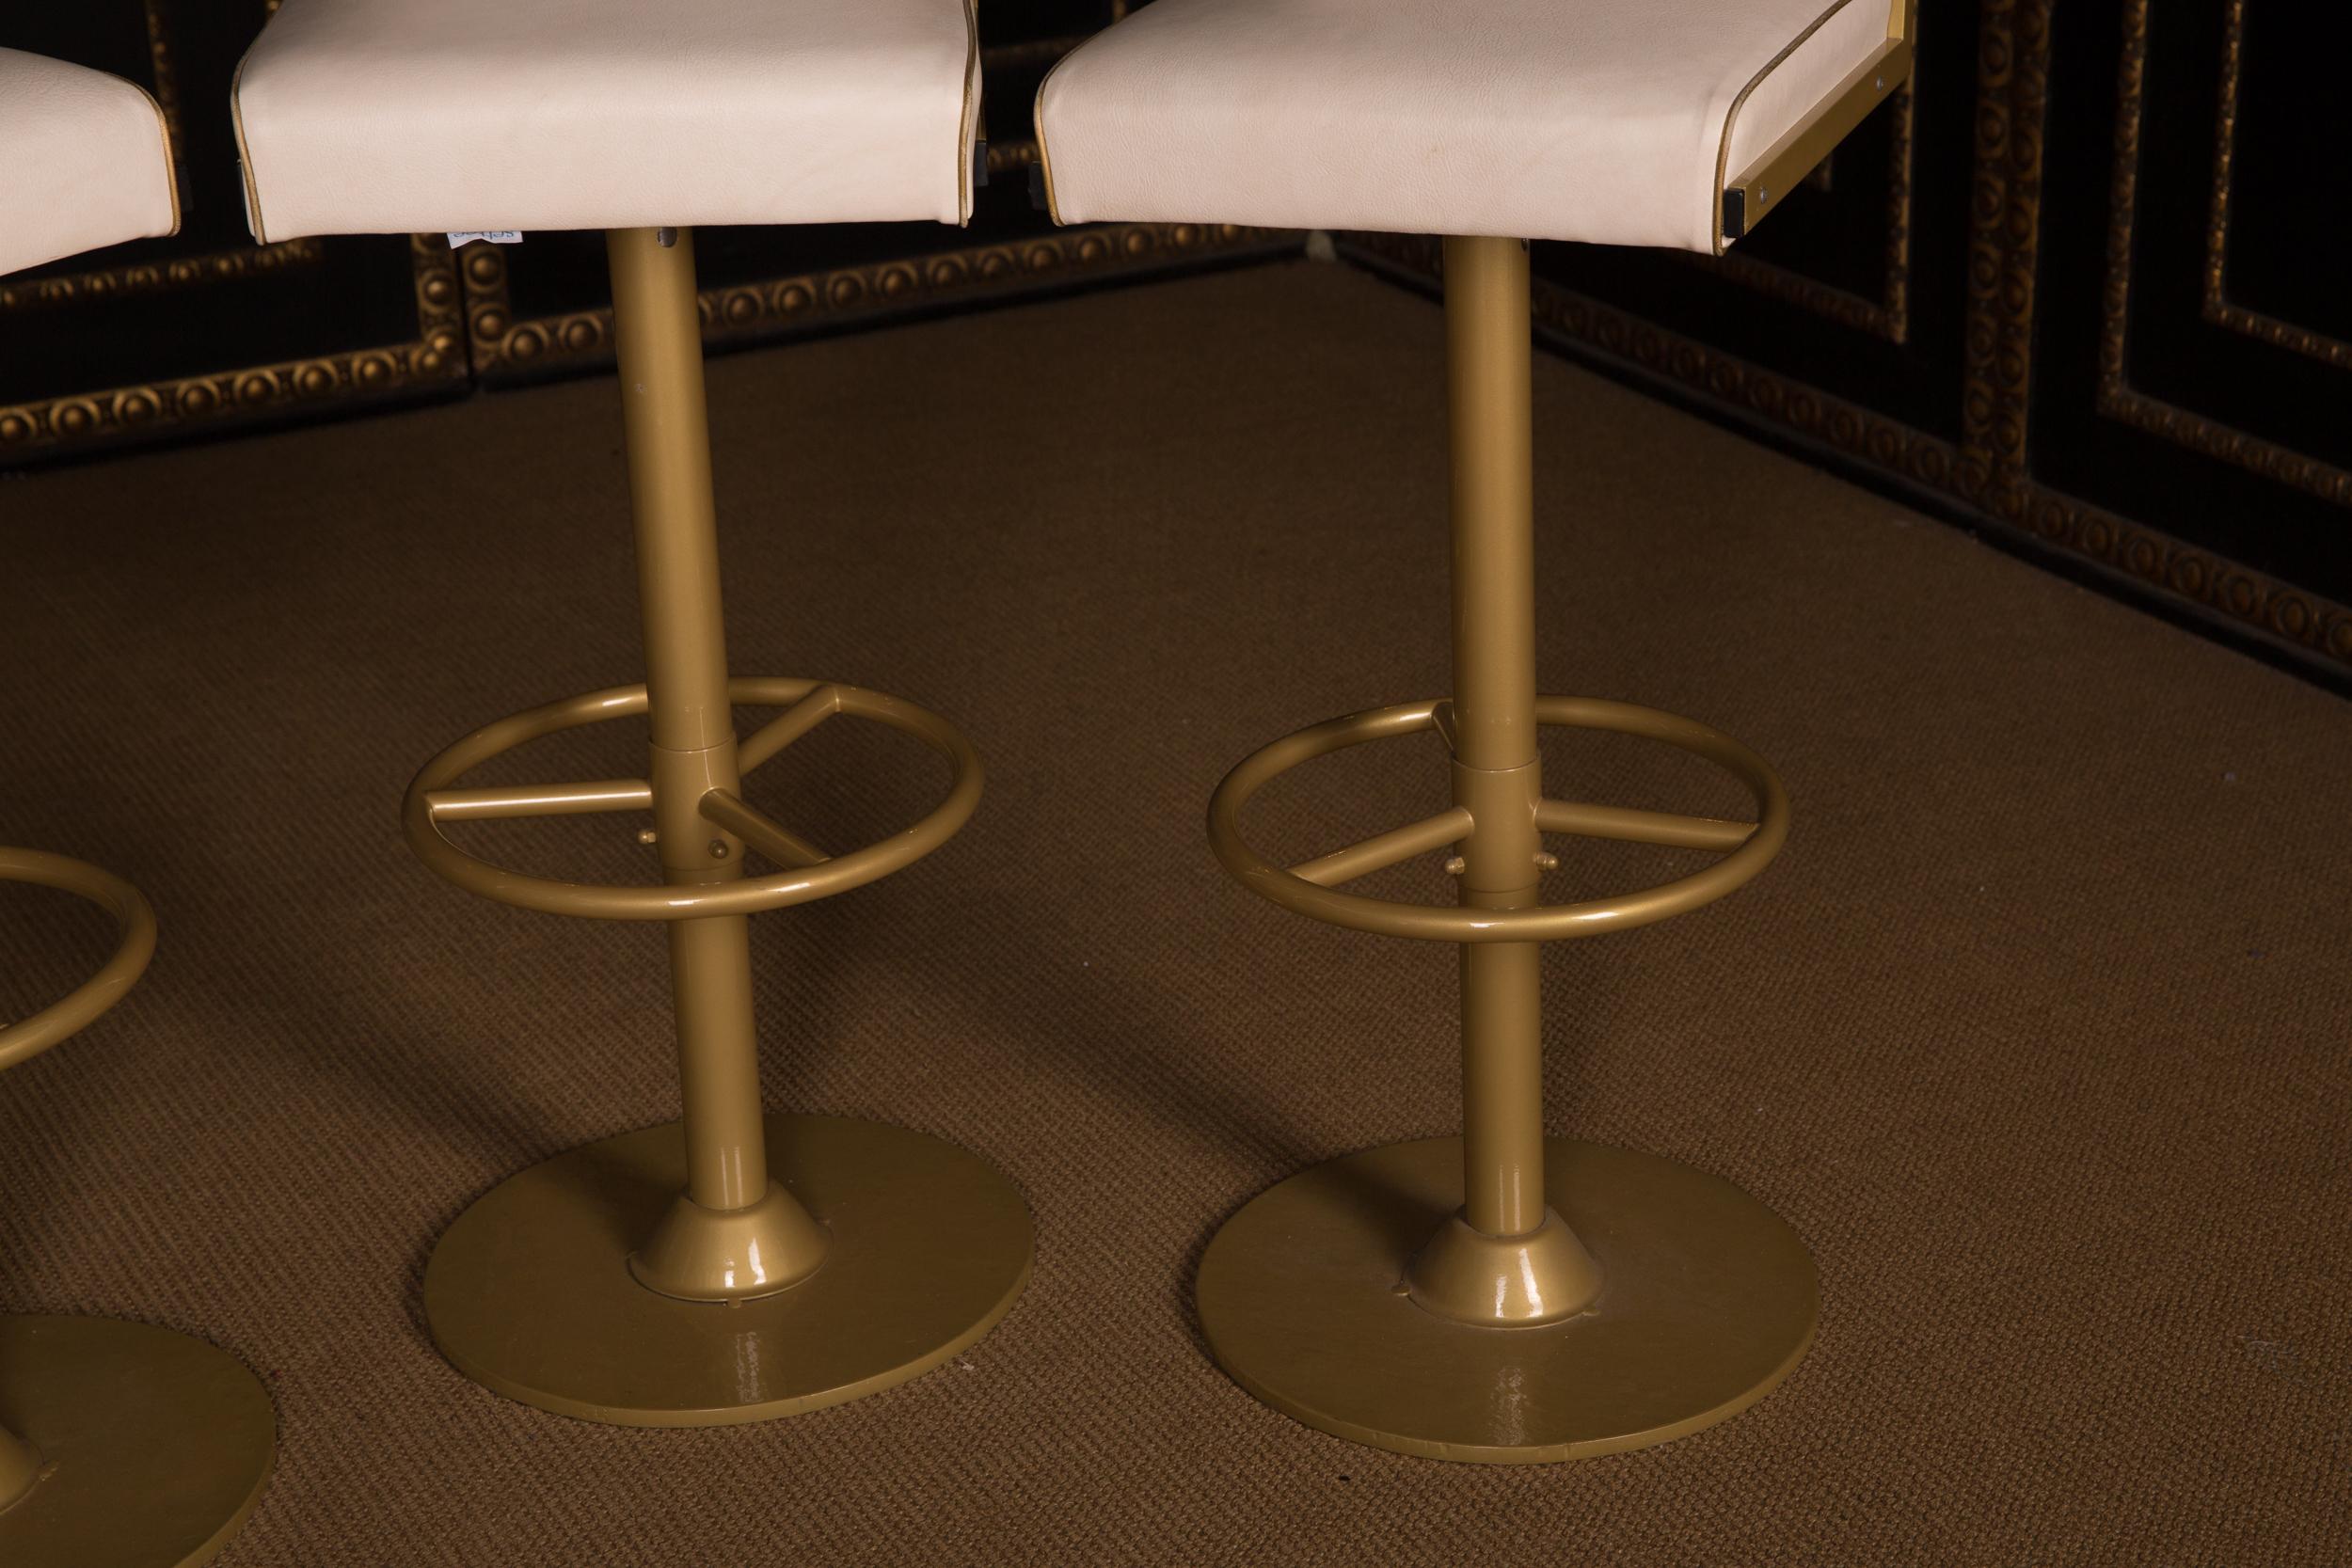 Lacquered Four High Quality Bar Stools Made of Metal in Golden Color